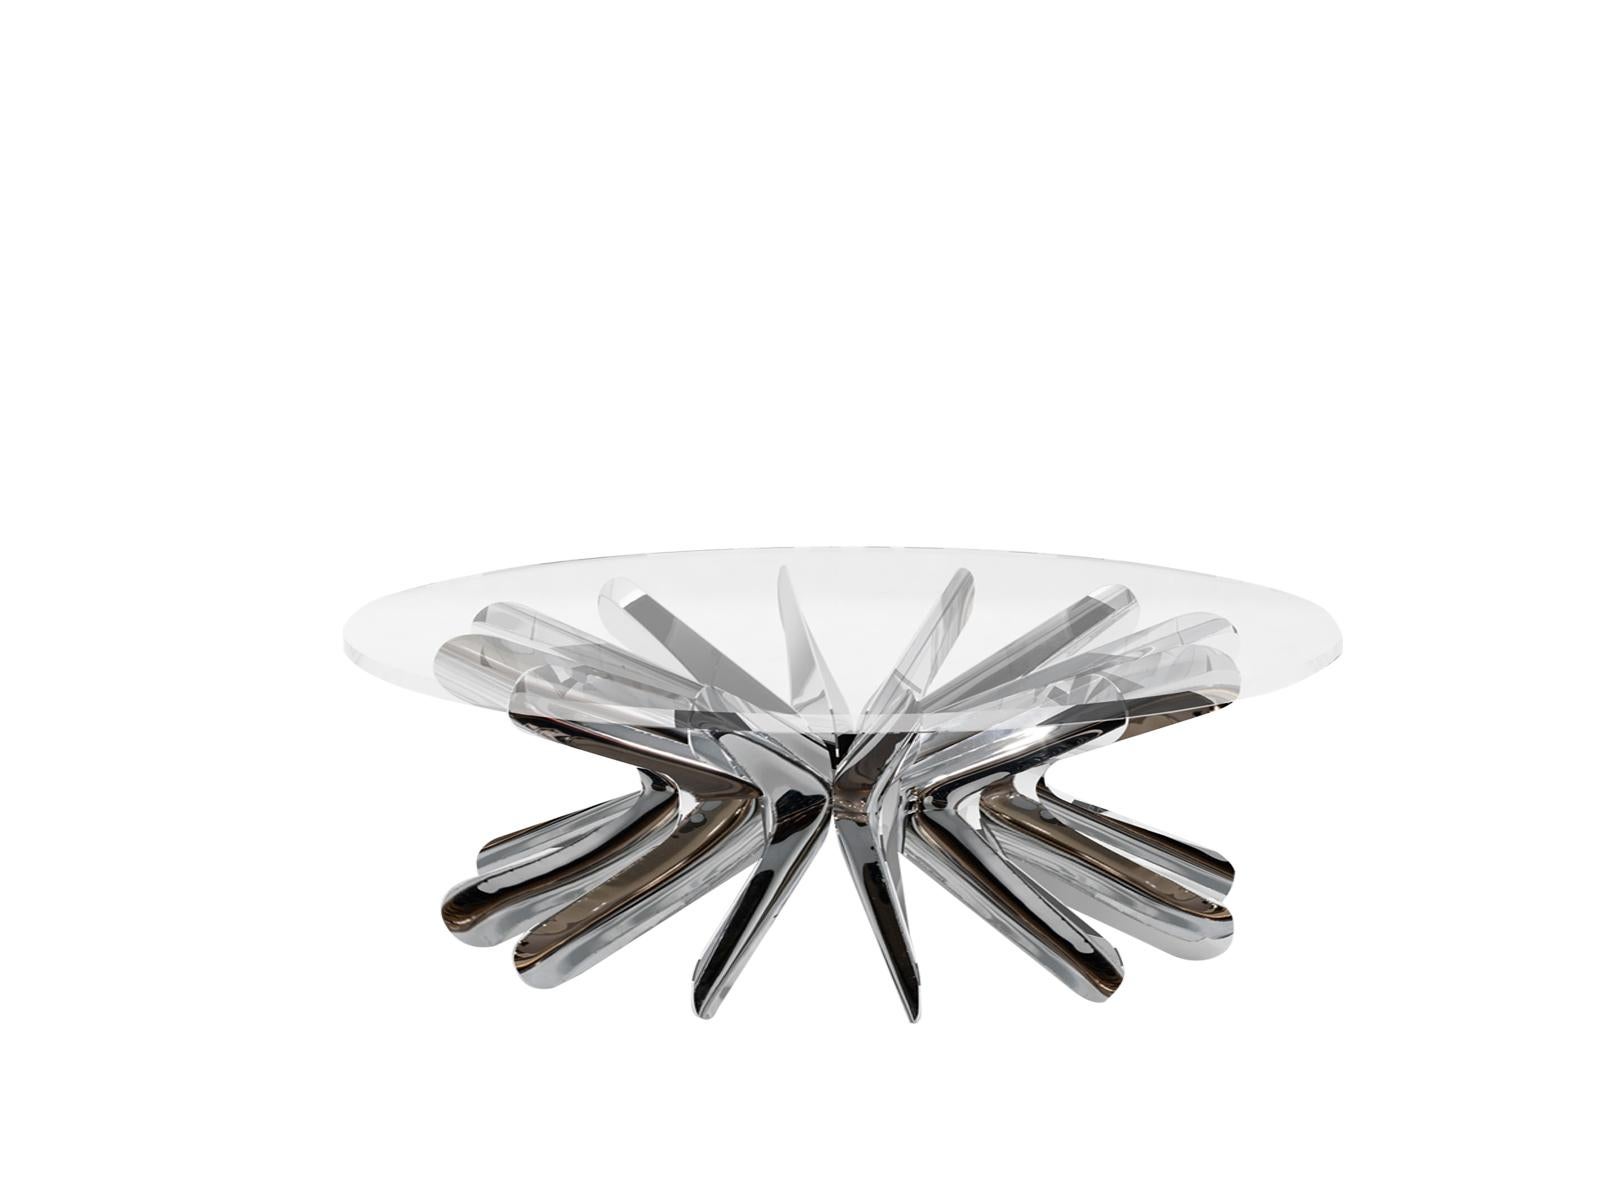 Limited Edition Rotation Coffee Table in Polished Stainless Steel In Excellent Condition For Sale In New York, NY